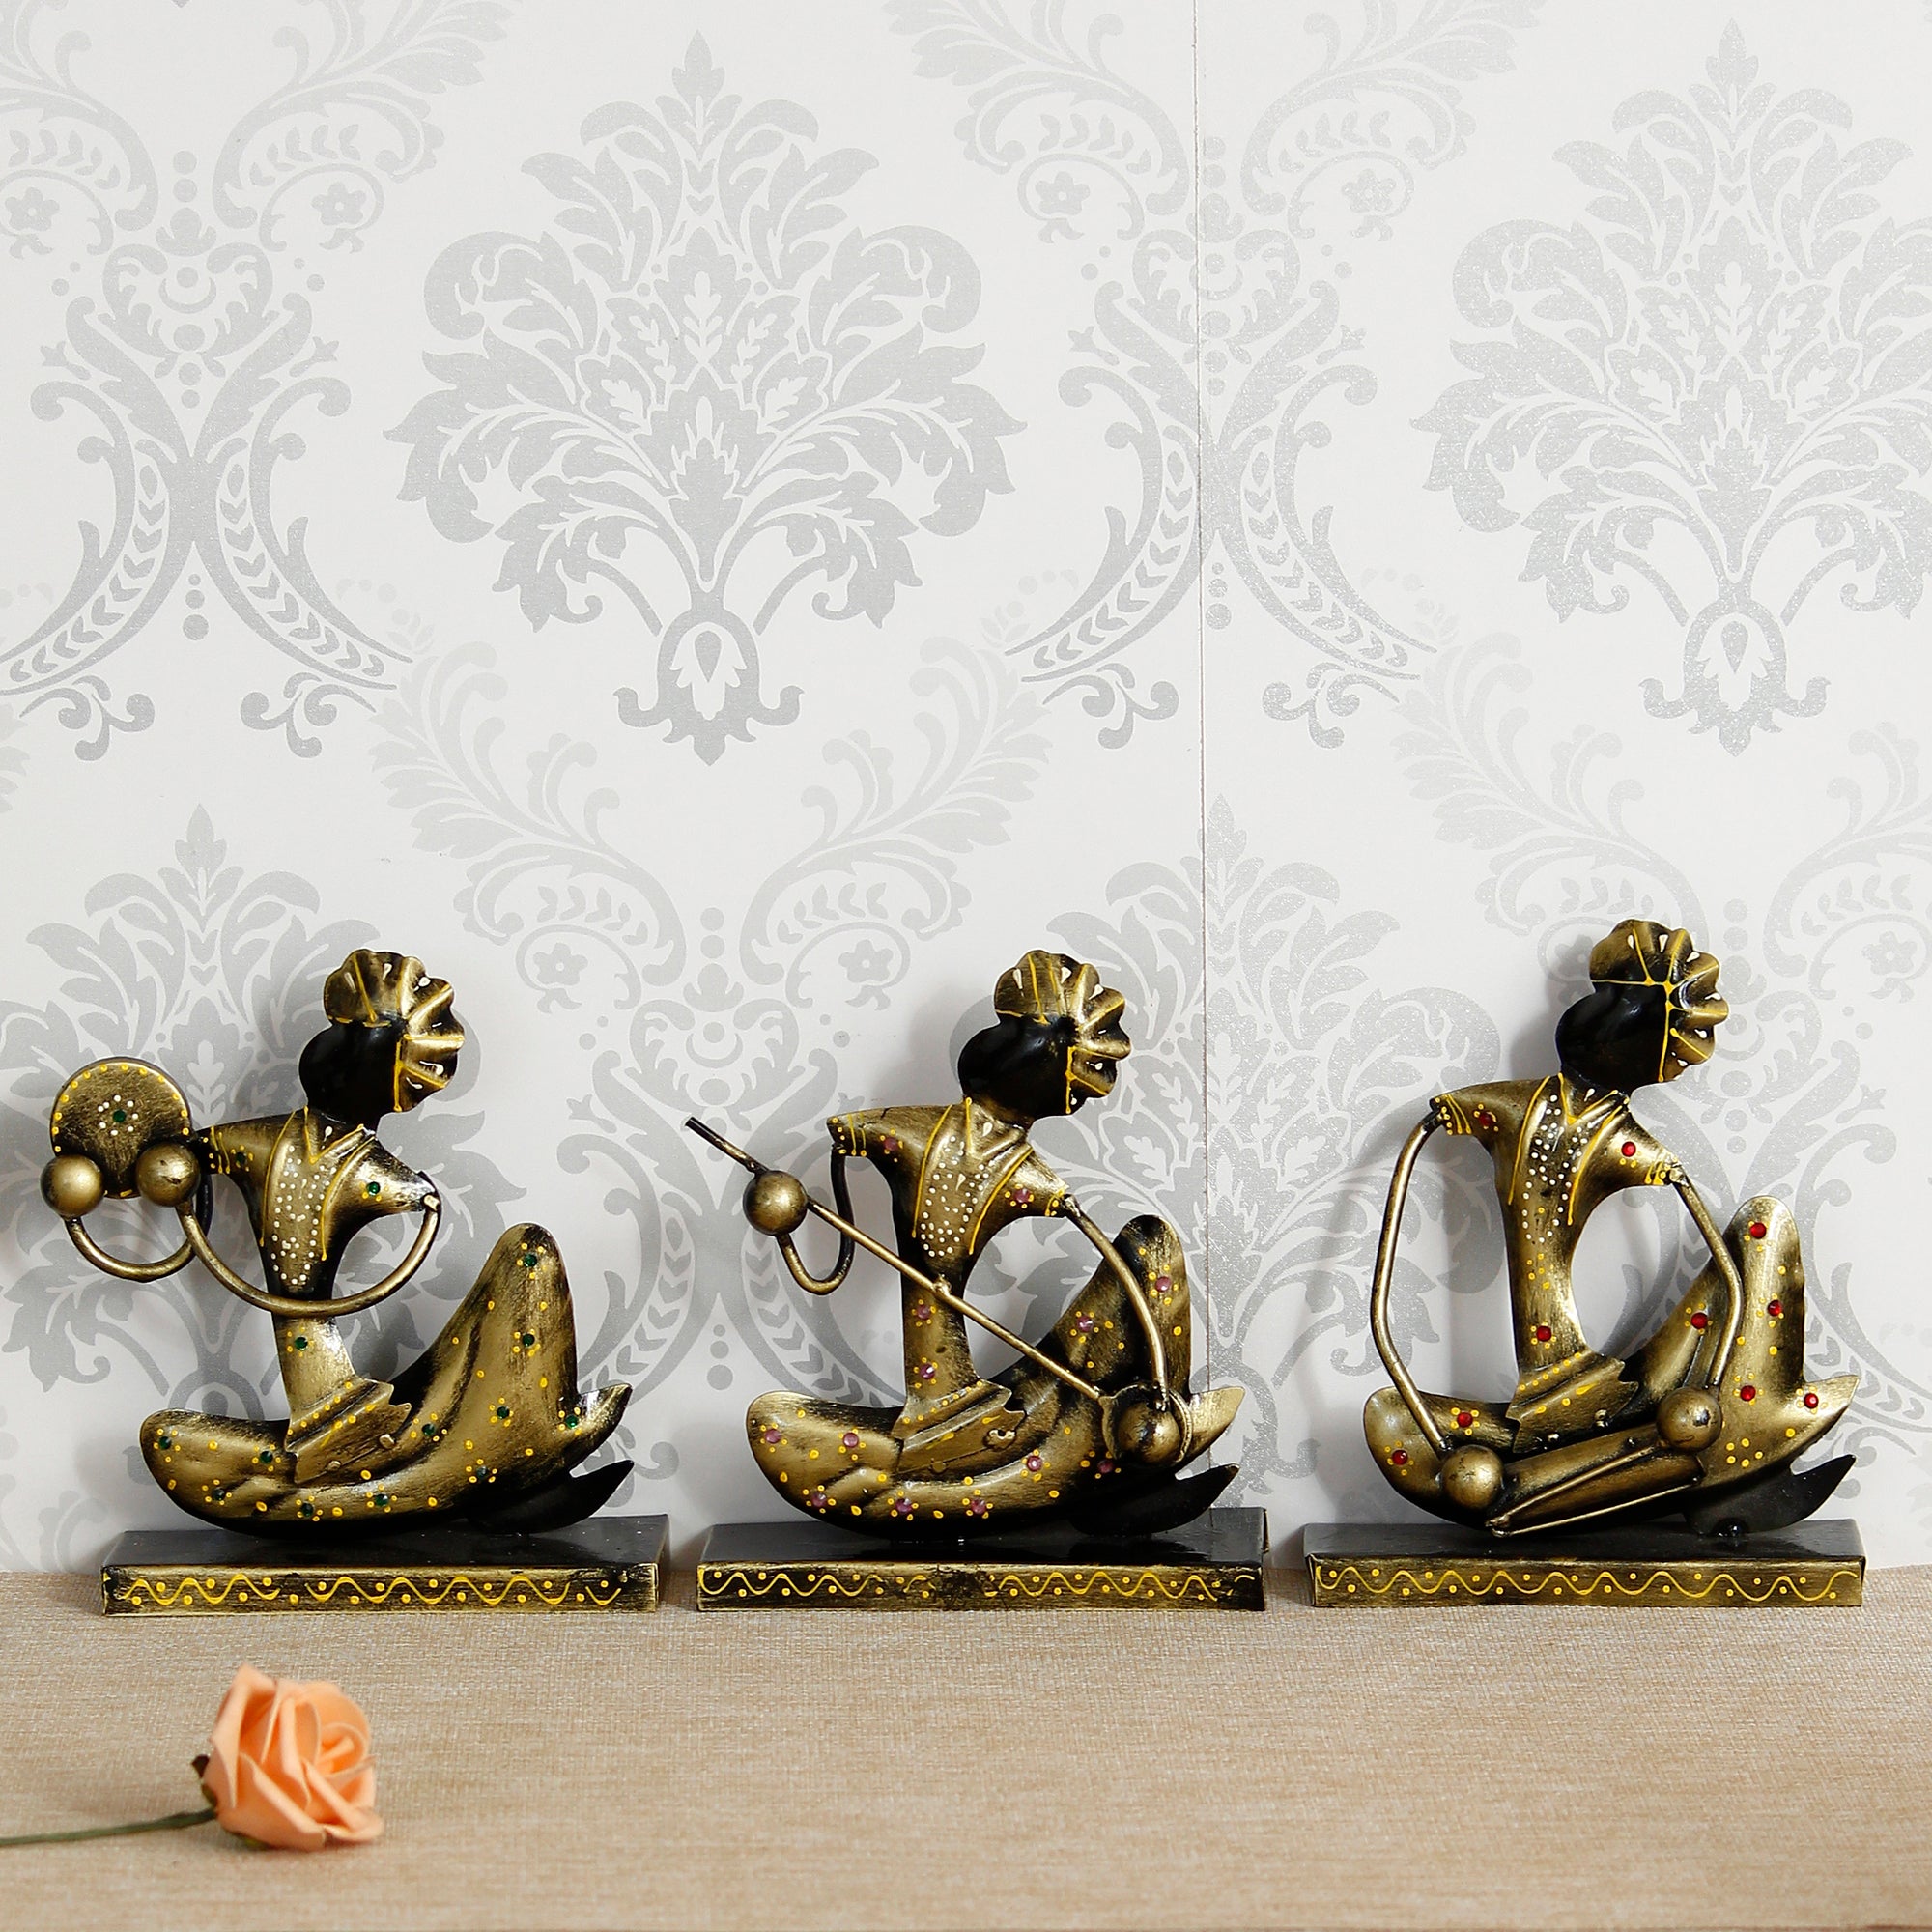 Iron Set of 3 Tribal Man Figurines with Paghdi Playing Tambourine/Dafli, Banjo, Dholak Musical Instruments Decorative Showpiece (Golden and Black)